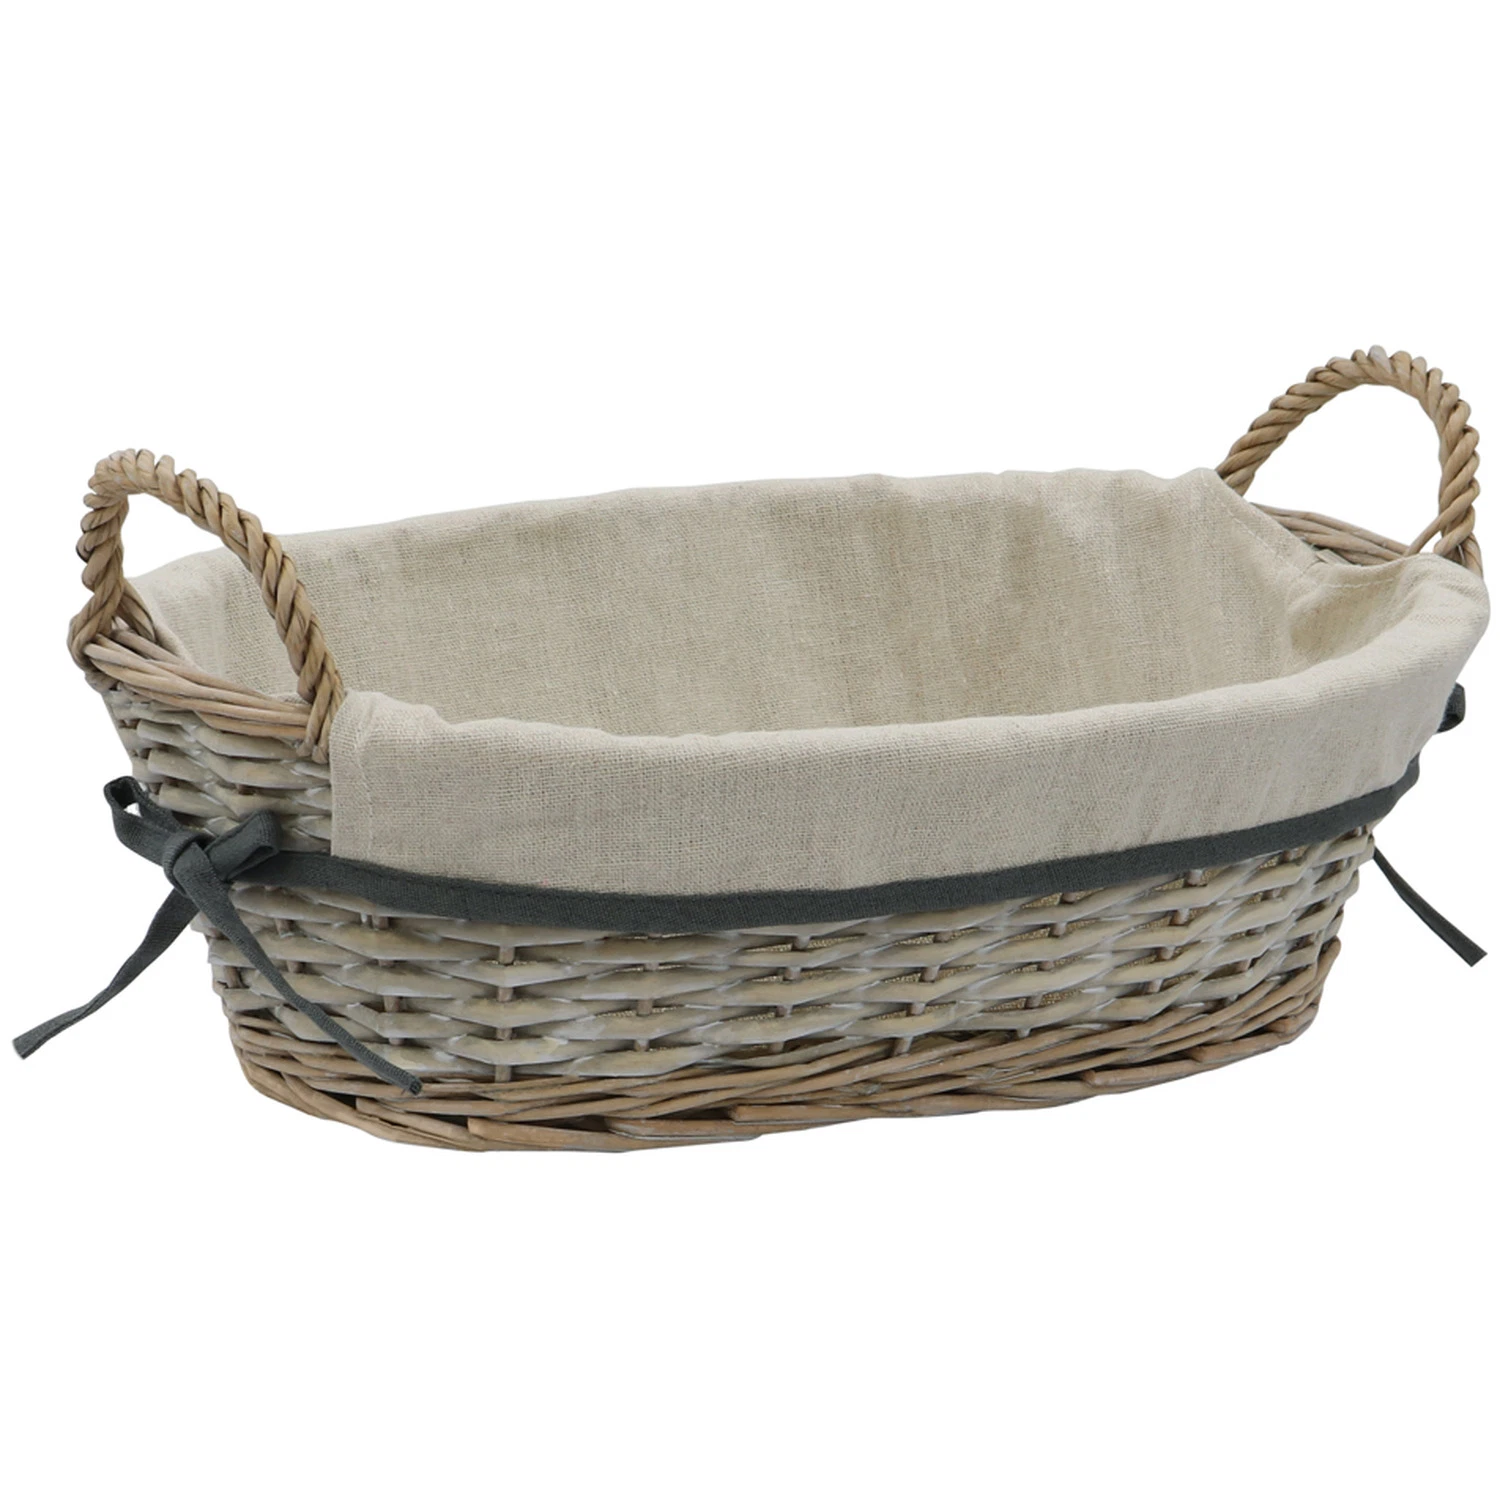 Hot Selling Oval Willow Storage Basket Weaving Basket for Home Storage